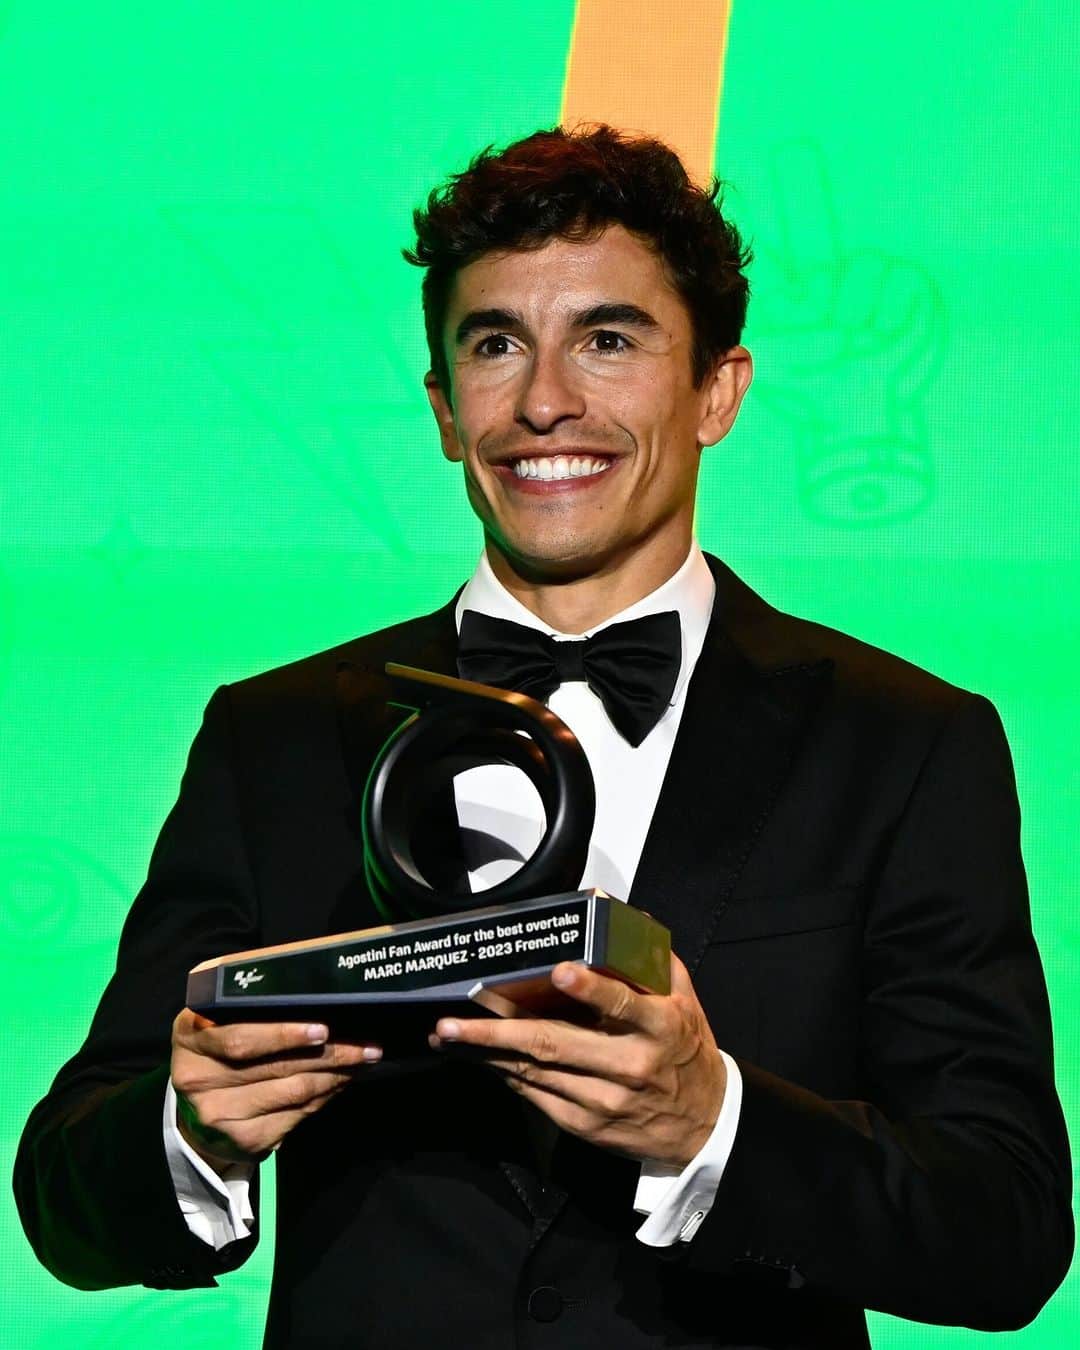 MotoGPのインスタグラム：「@marcmarquez93 didn't finish the season empty-handed as he won the Agostini Fan Award! 🏅 We asked you, our beloved fans, to vote for the best overtake of 2023 and his move on @pecco63 in the #TissotSprint of the #FrenchGP 🇫🇷 was the winner! 😎   #ValenciaGP 🏁 #MotoGP #Motorsport #Motorcycle #Racing #MM93 #MarcMarquez」